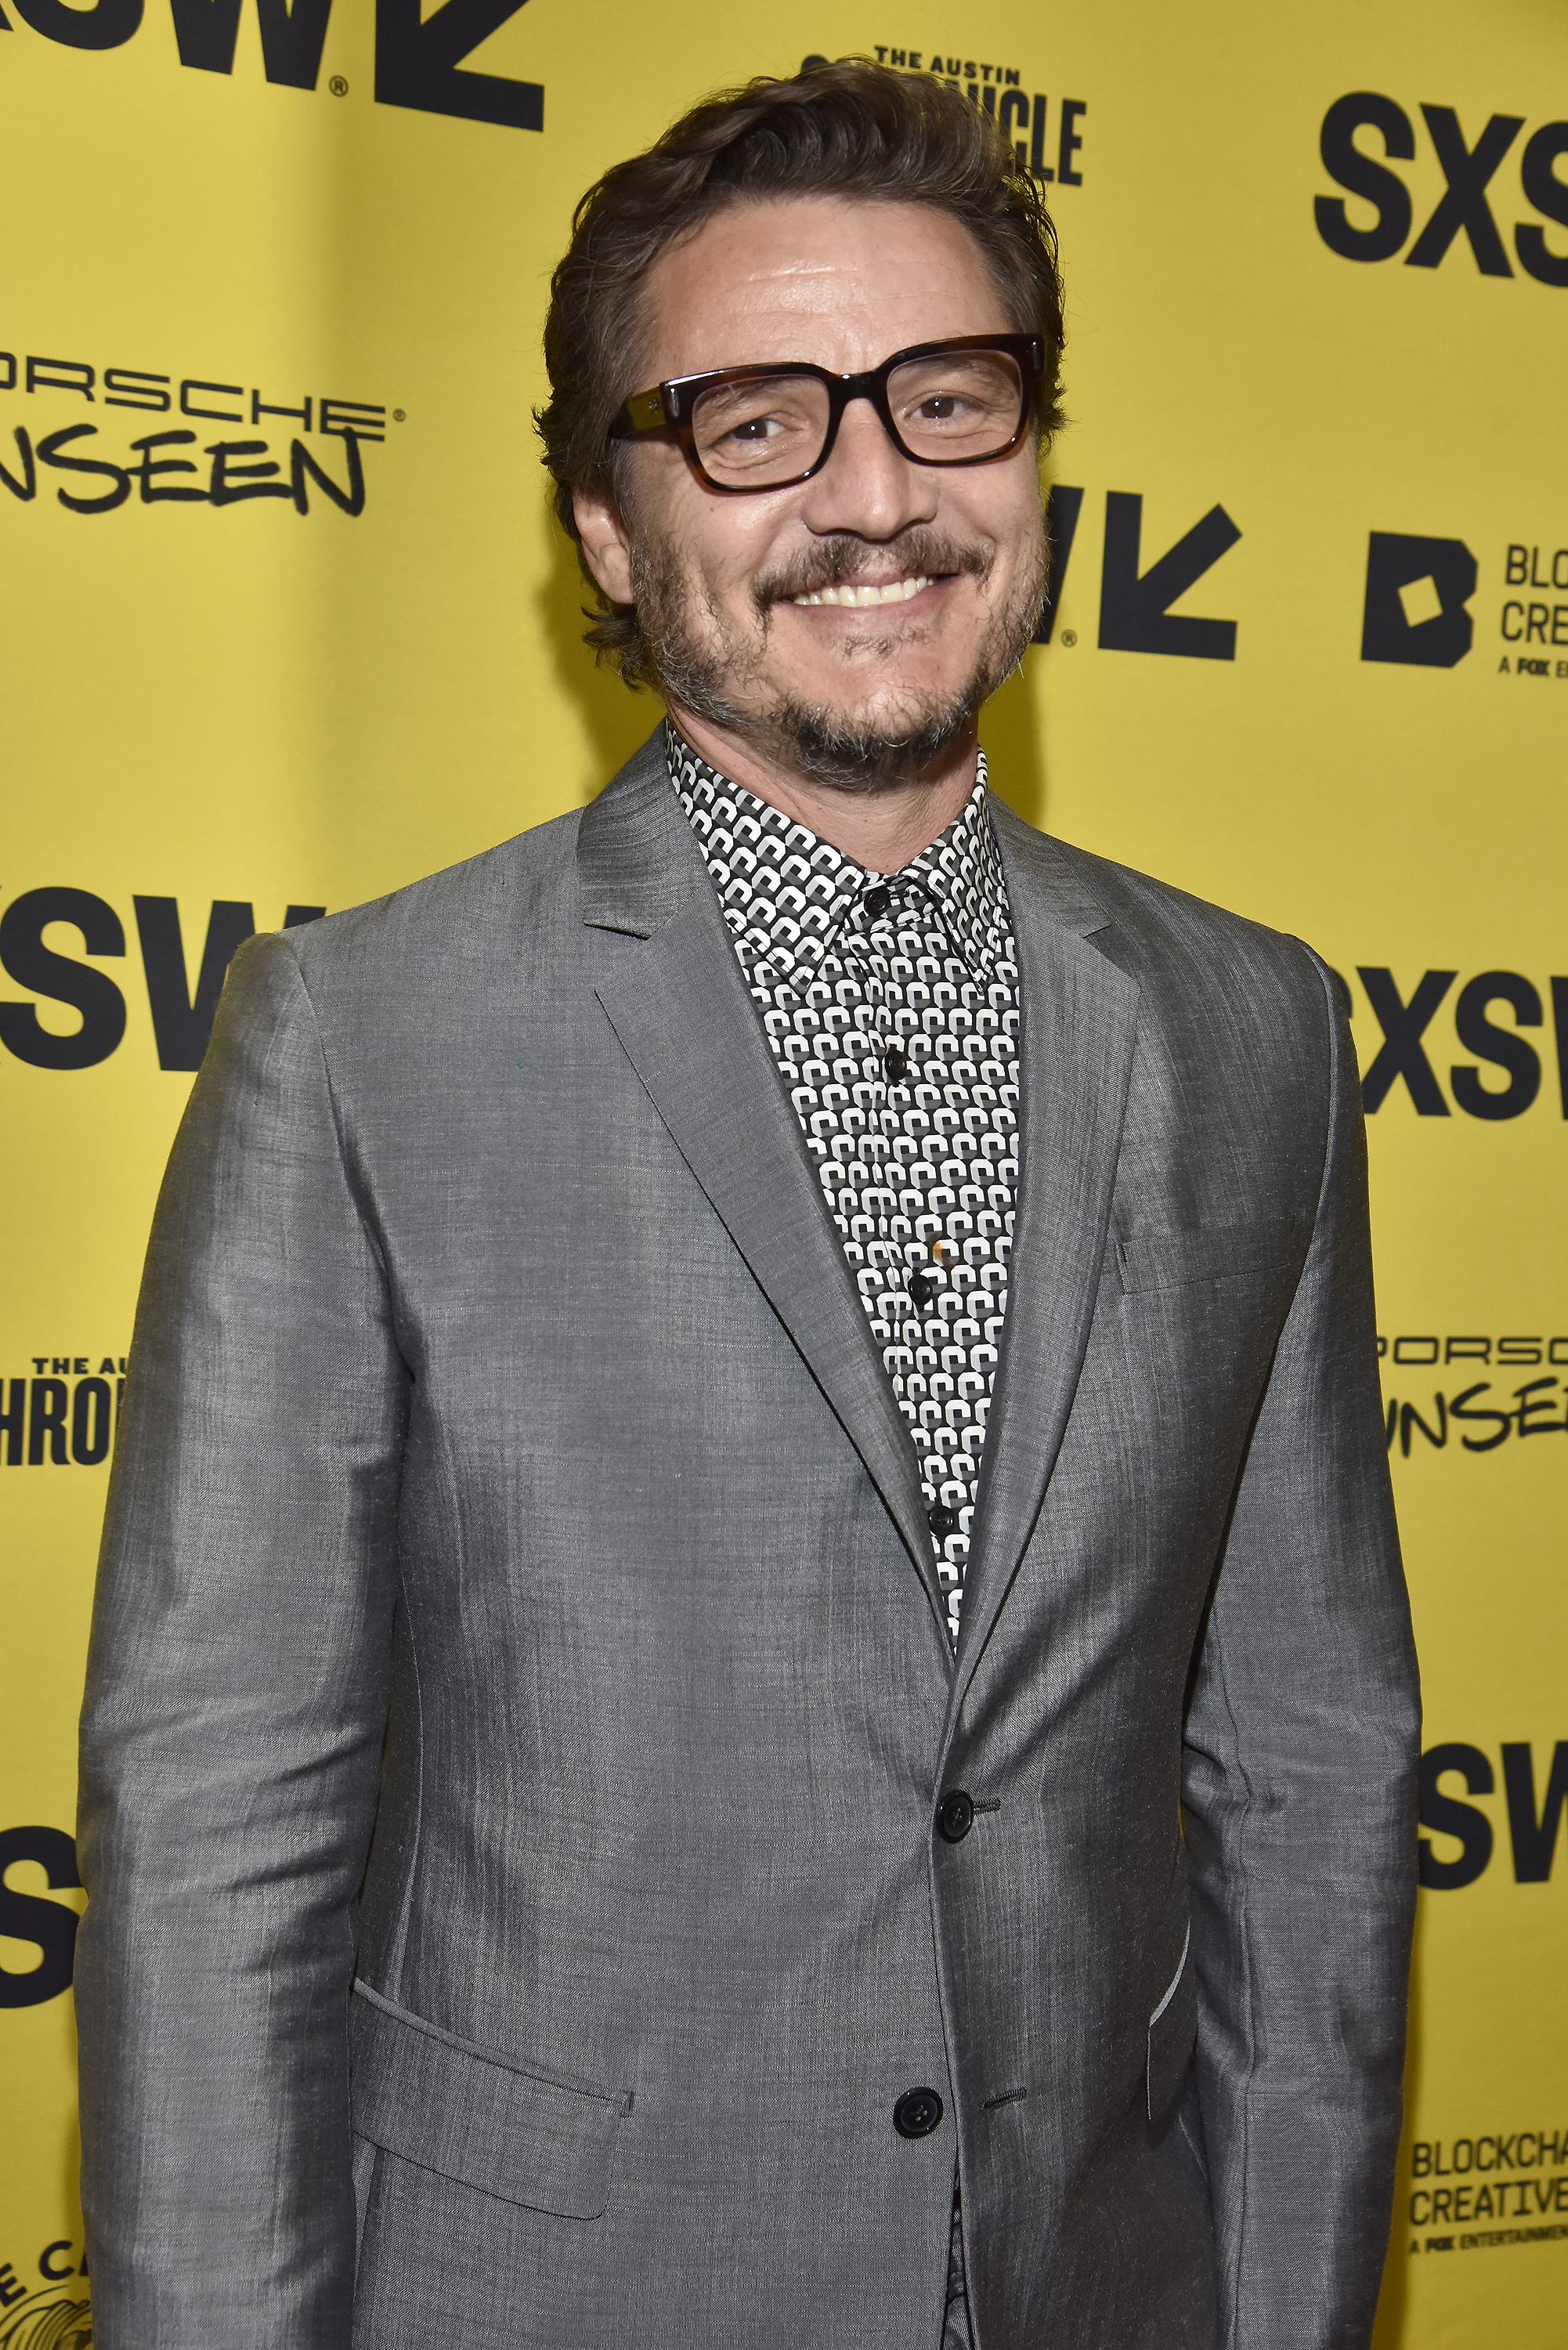 Pedro Pascal at an event for The Unbearable Weight of Massive Talent (2022)